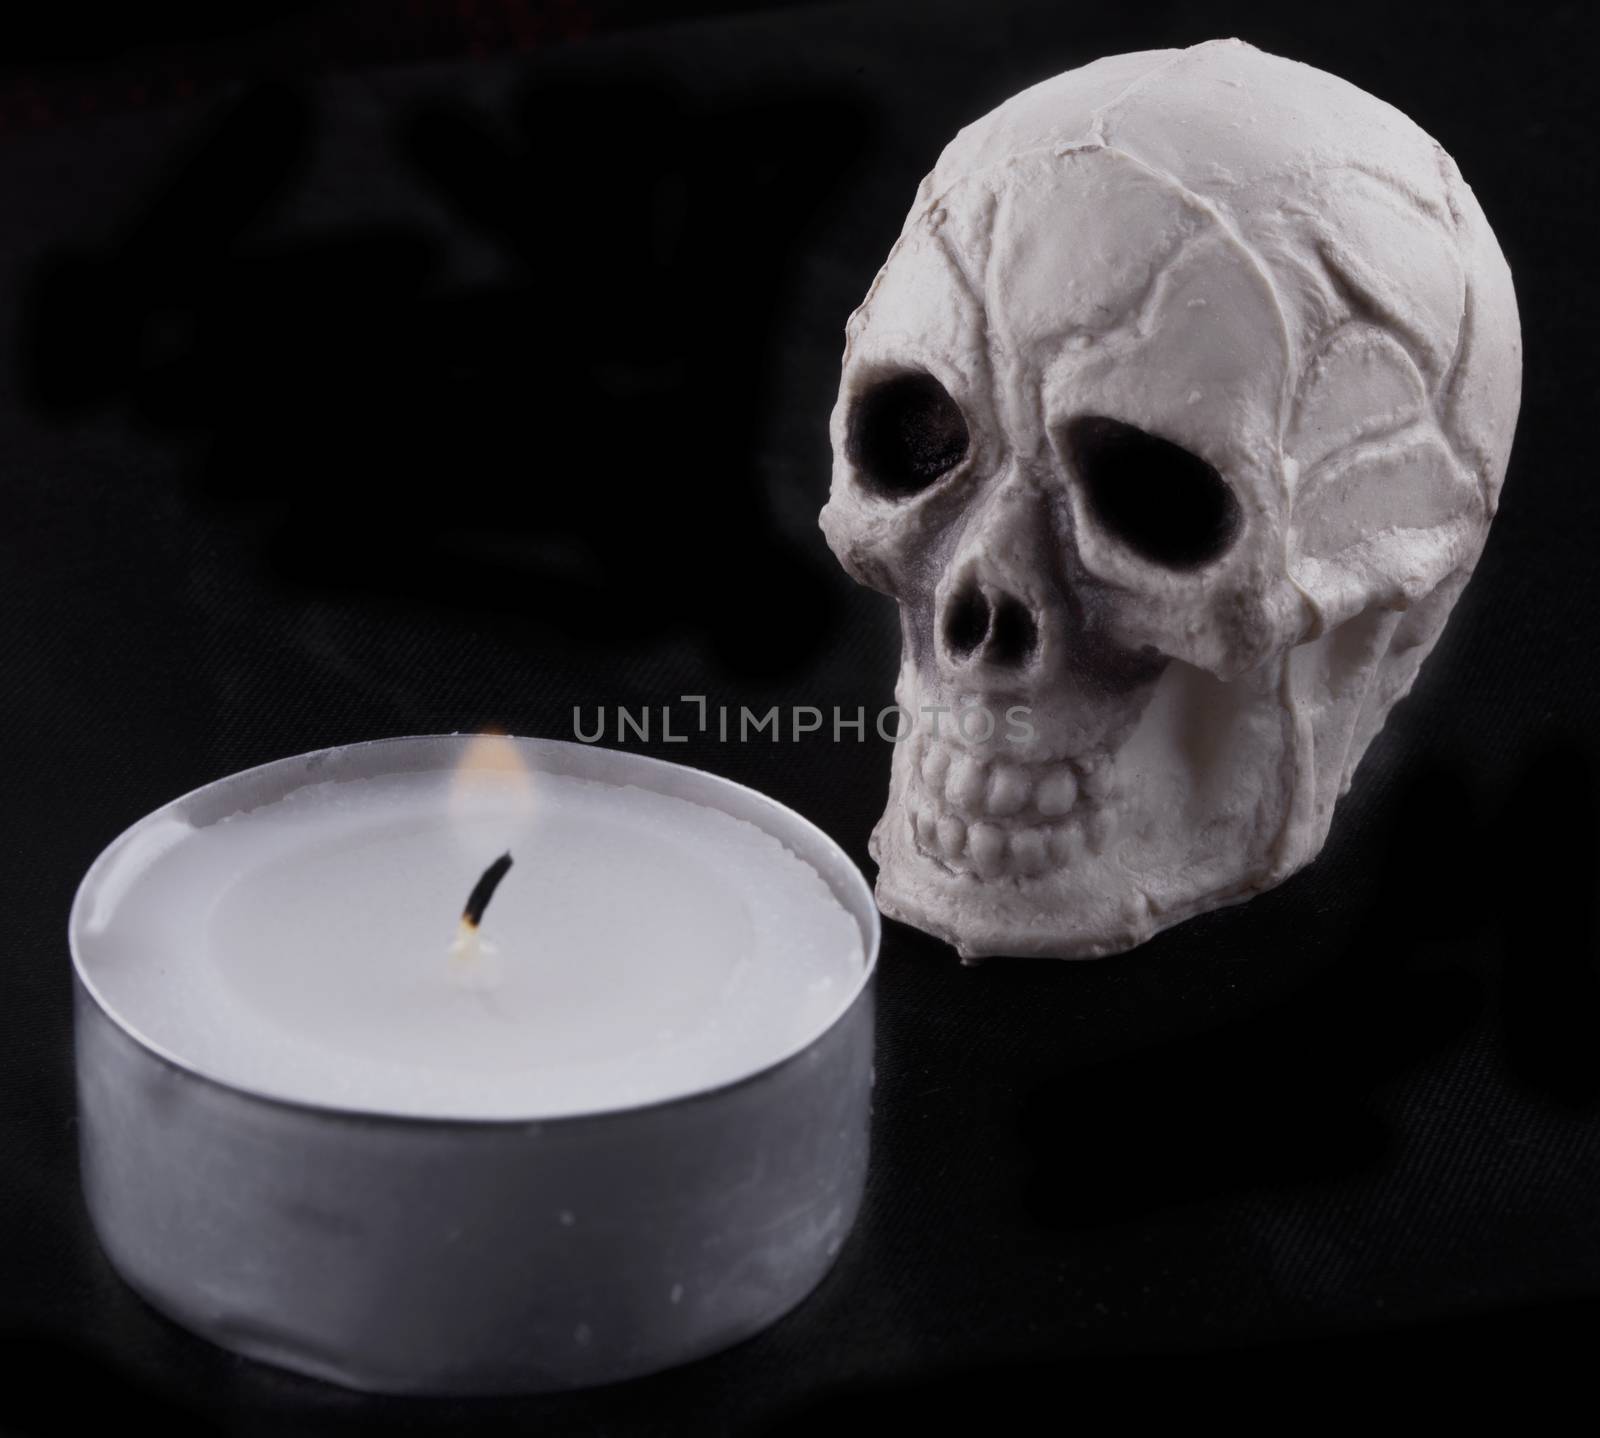 Skull behind a candle in black background